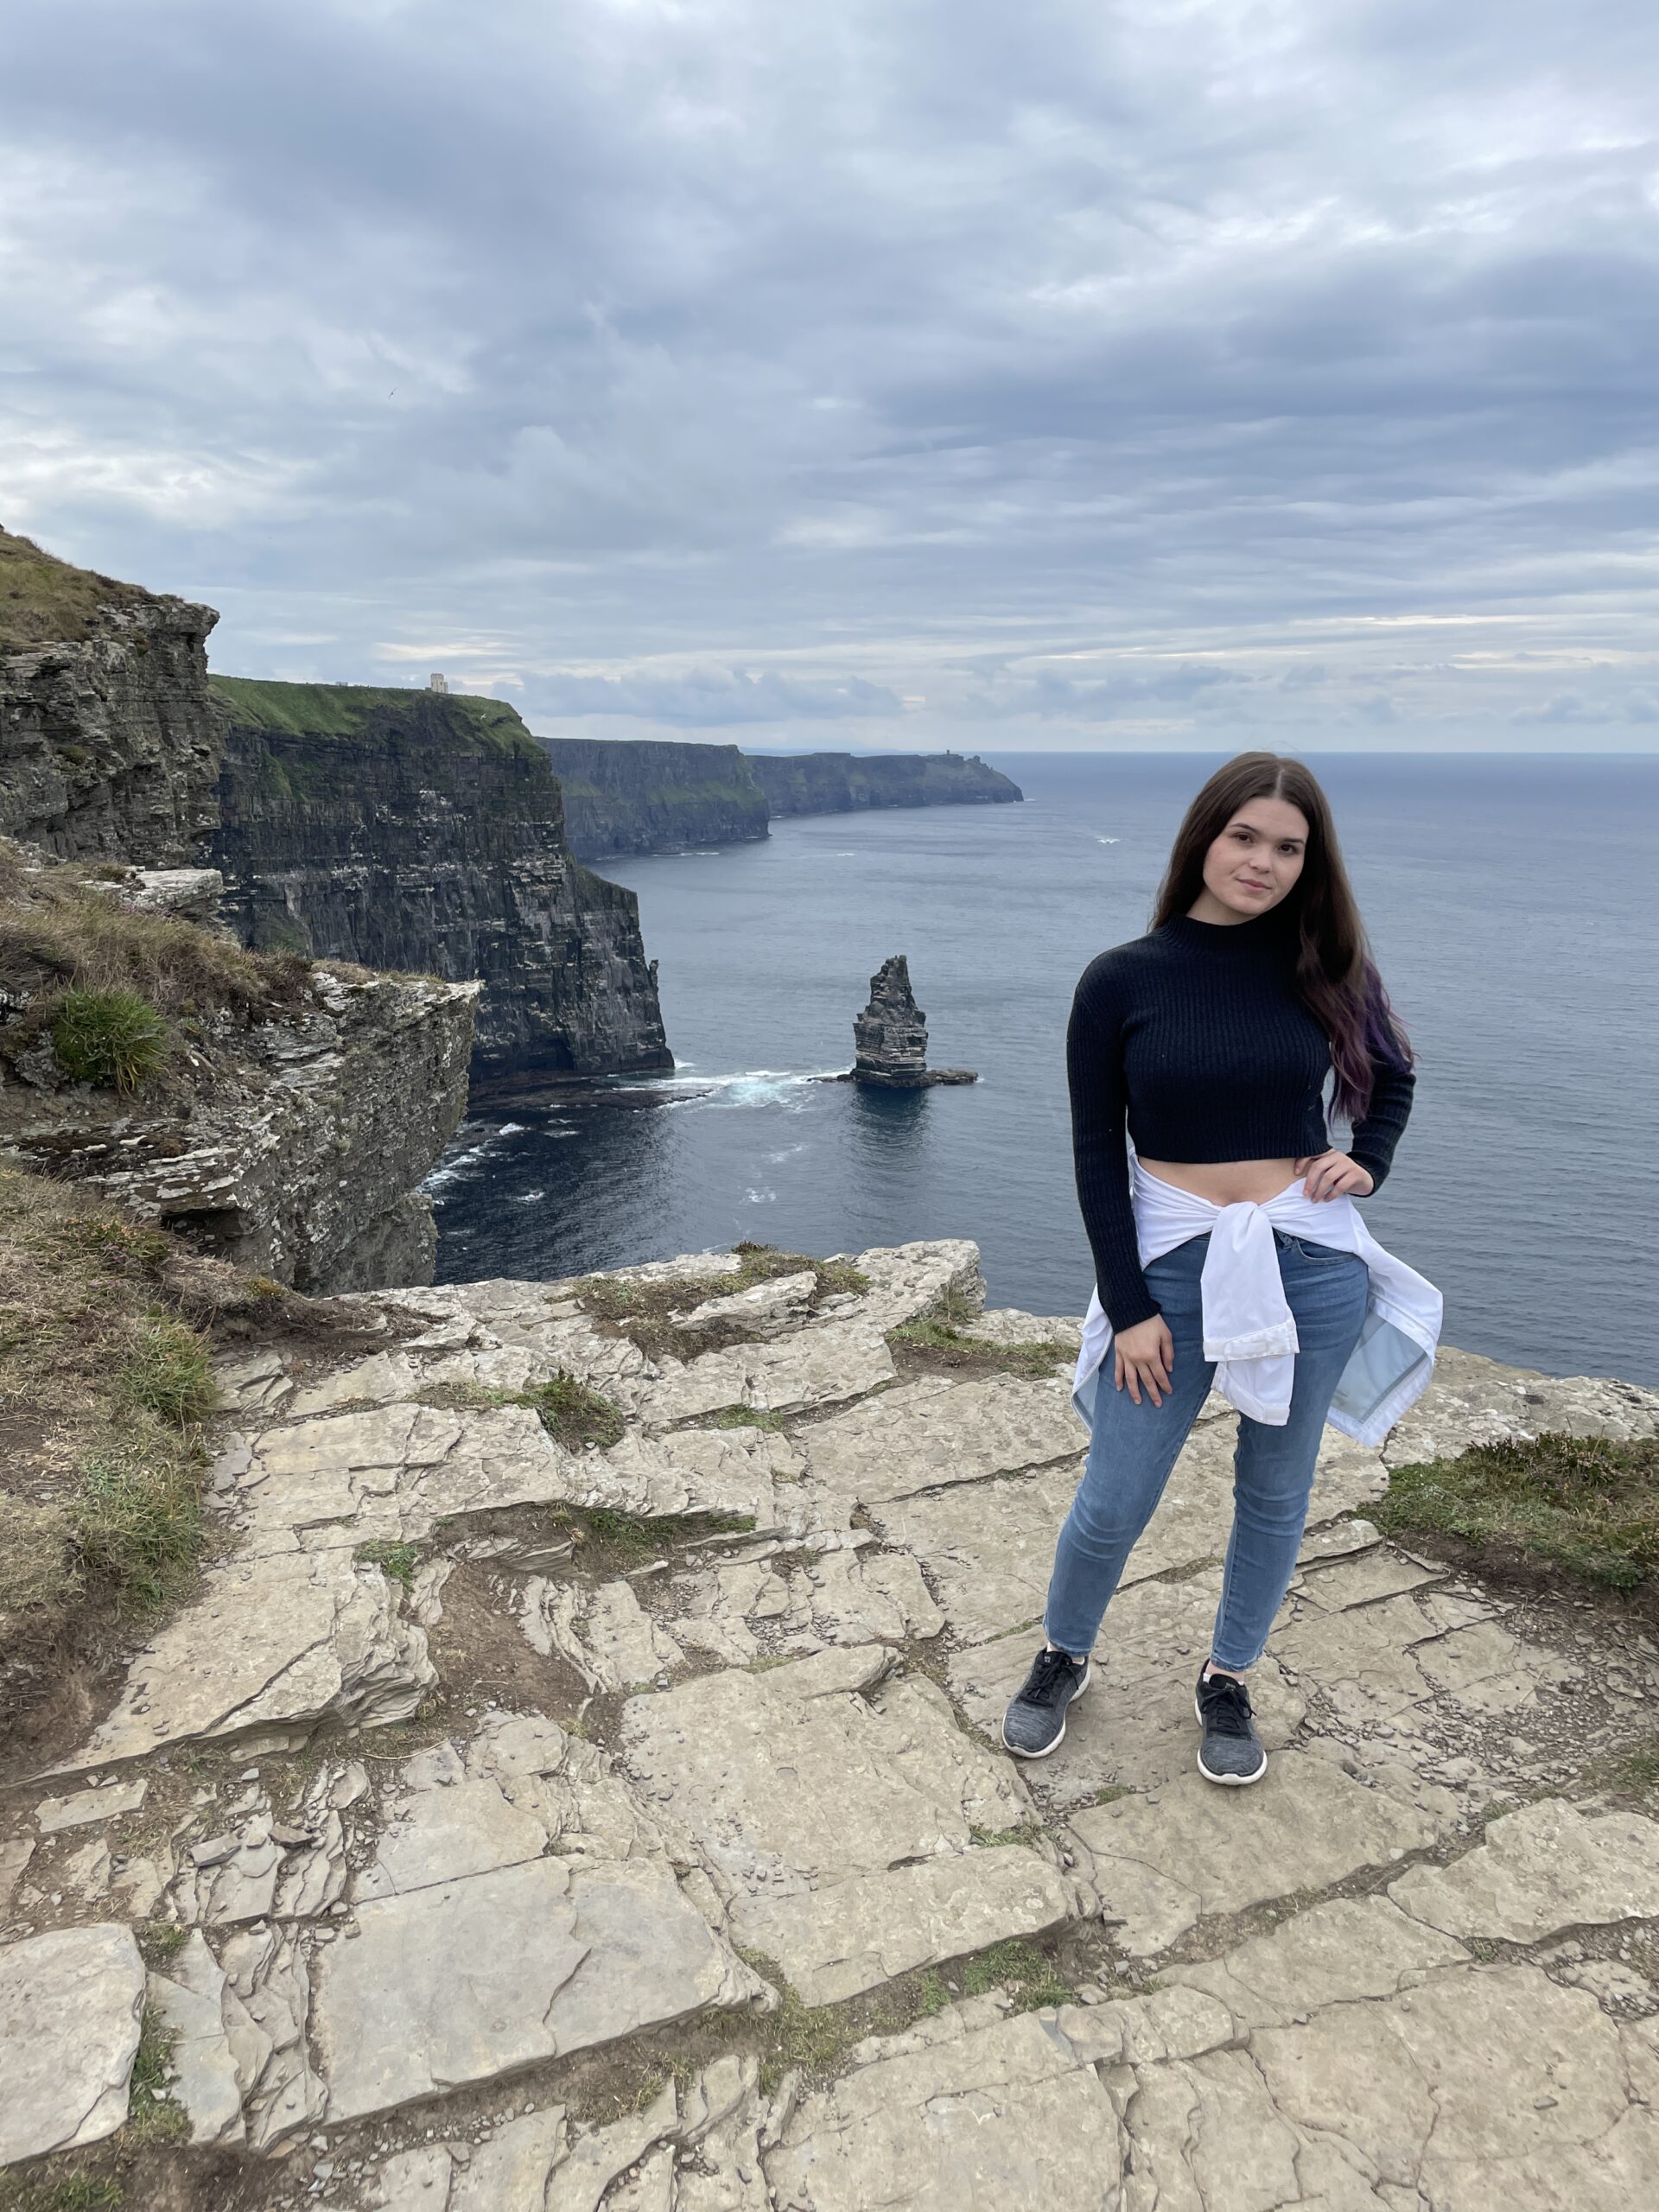 Solo travel girl in Ireland by the sea on the Cliffs of Moher.